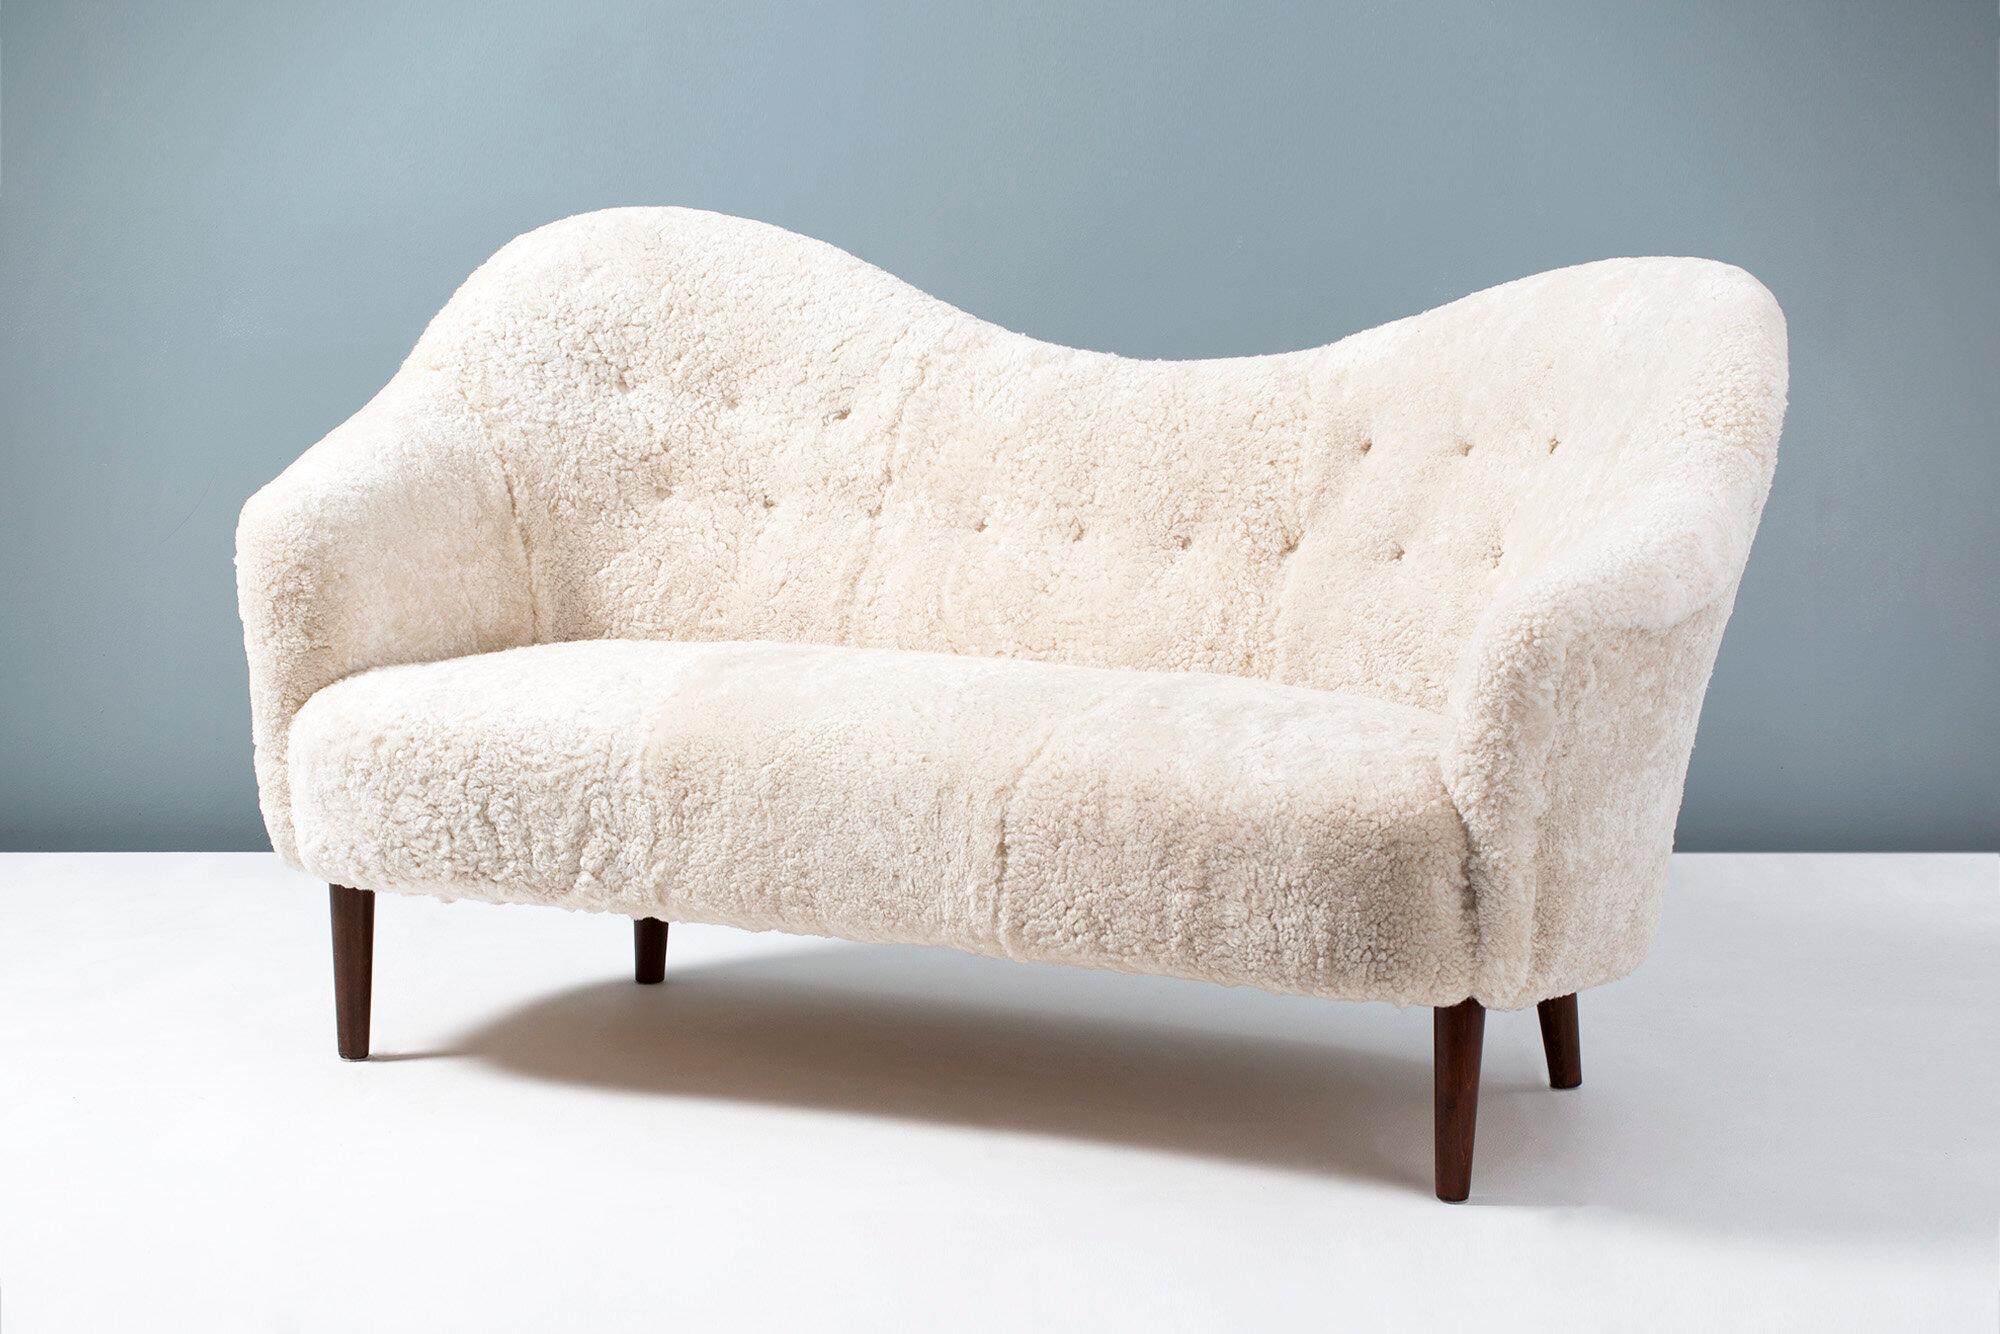 Carl Malmsten 'Samspel' sofa

This iconic piece of Swedish furniture was designed in 1956 by master cabinetmaker Carl Malmsten. It was produced by AB Record in Bollnas, Sweden. This example has been reupholstered in luxurious Australian shearling